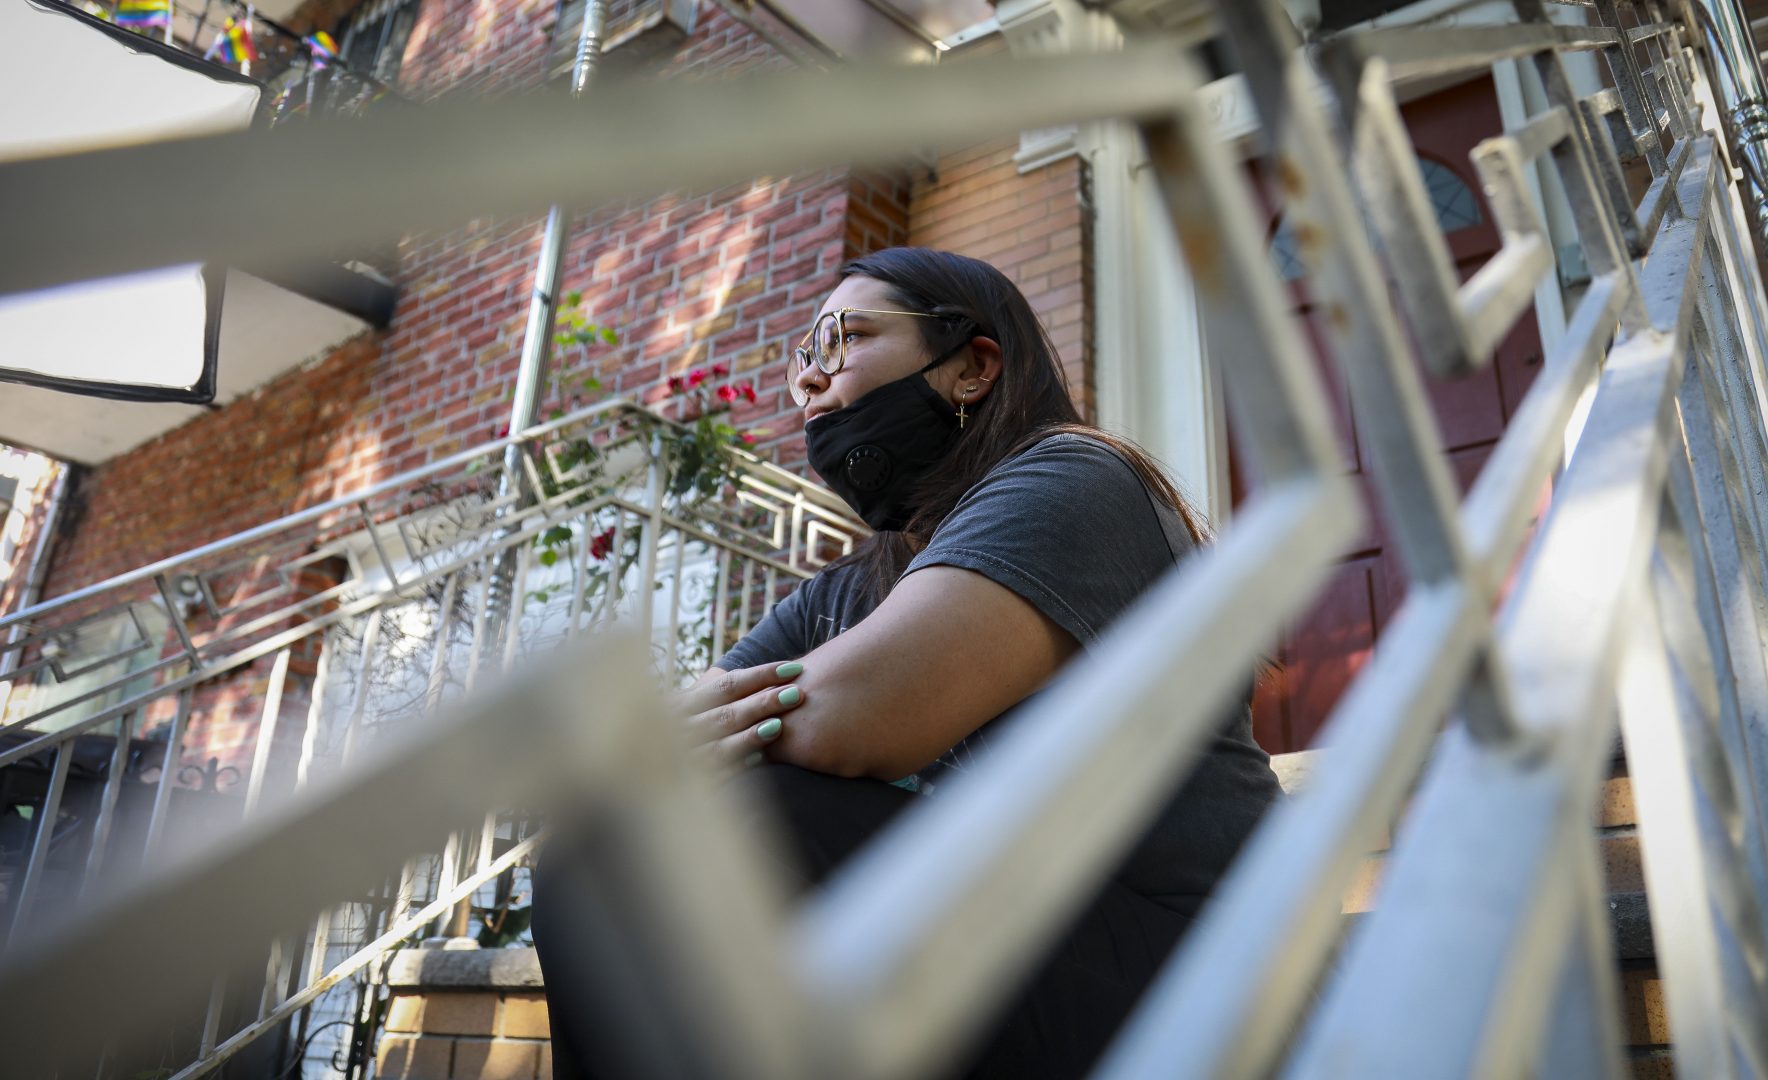 Natalia Afonso, 27, an international student from Brazil at Brooklyn College, sits on a stoop outside her home during an interview, Thursday, July 9, 2020, in New York. Afonso, who is studying teaching education and finished her first semester this spring, said she has lived in the U.S. for 7 years and 